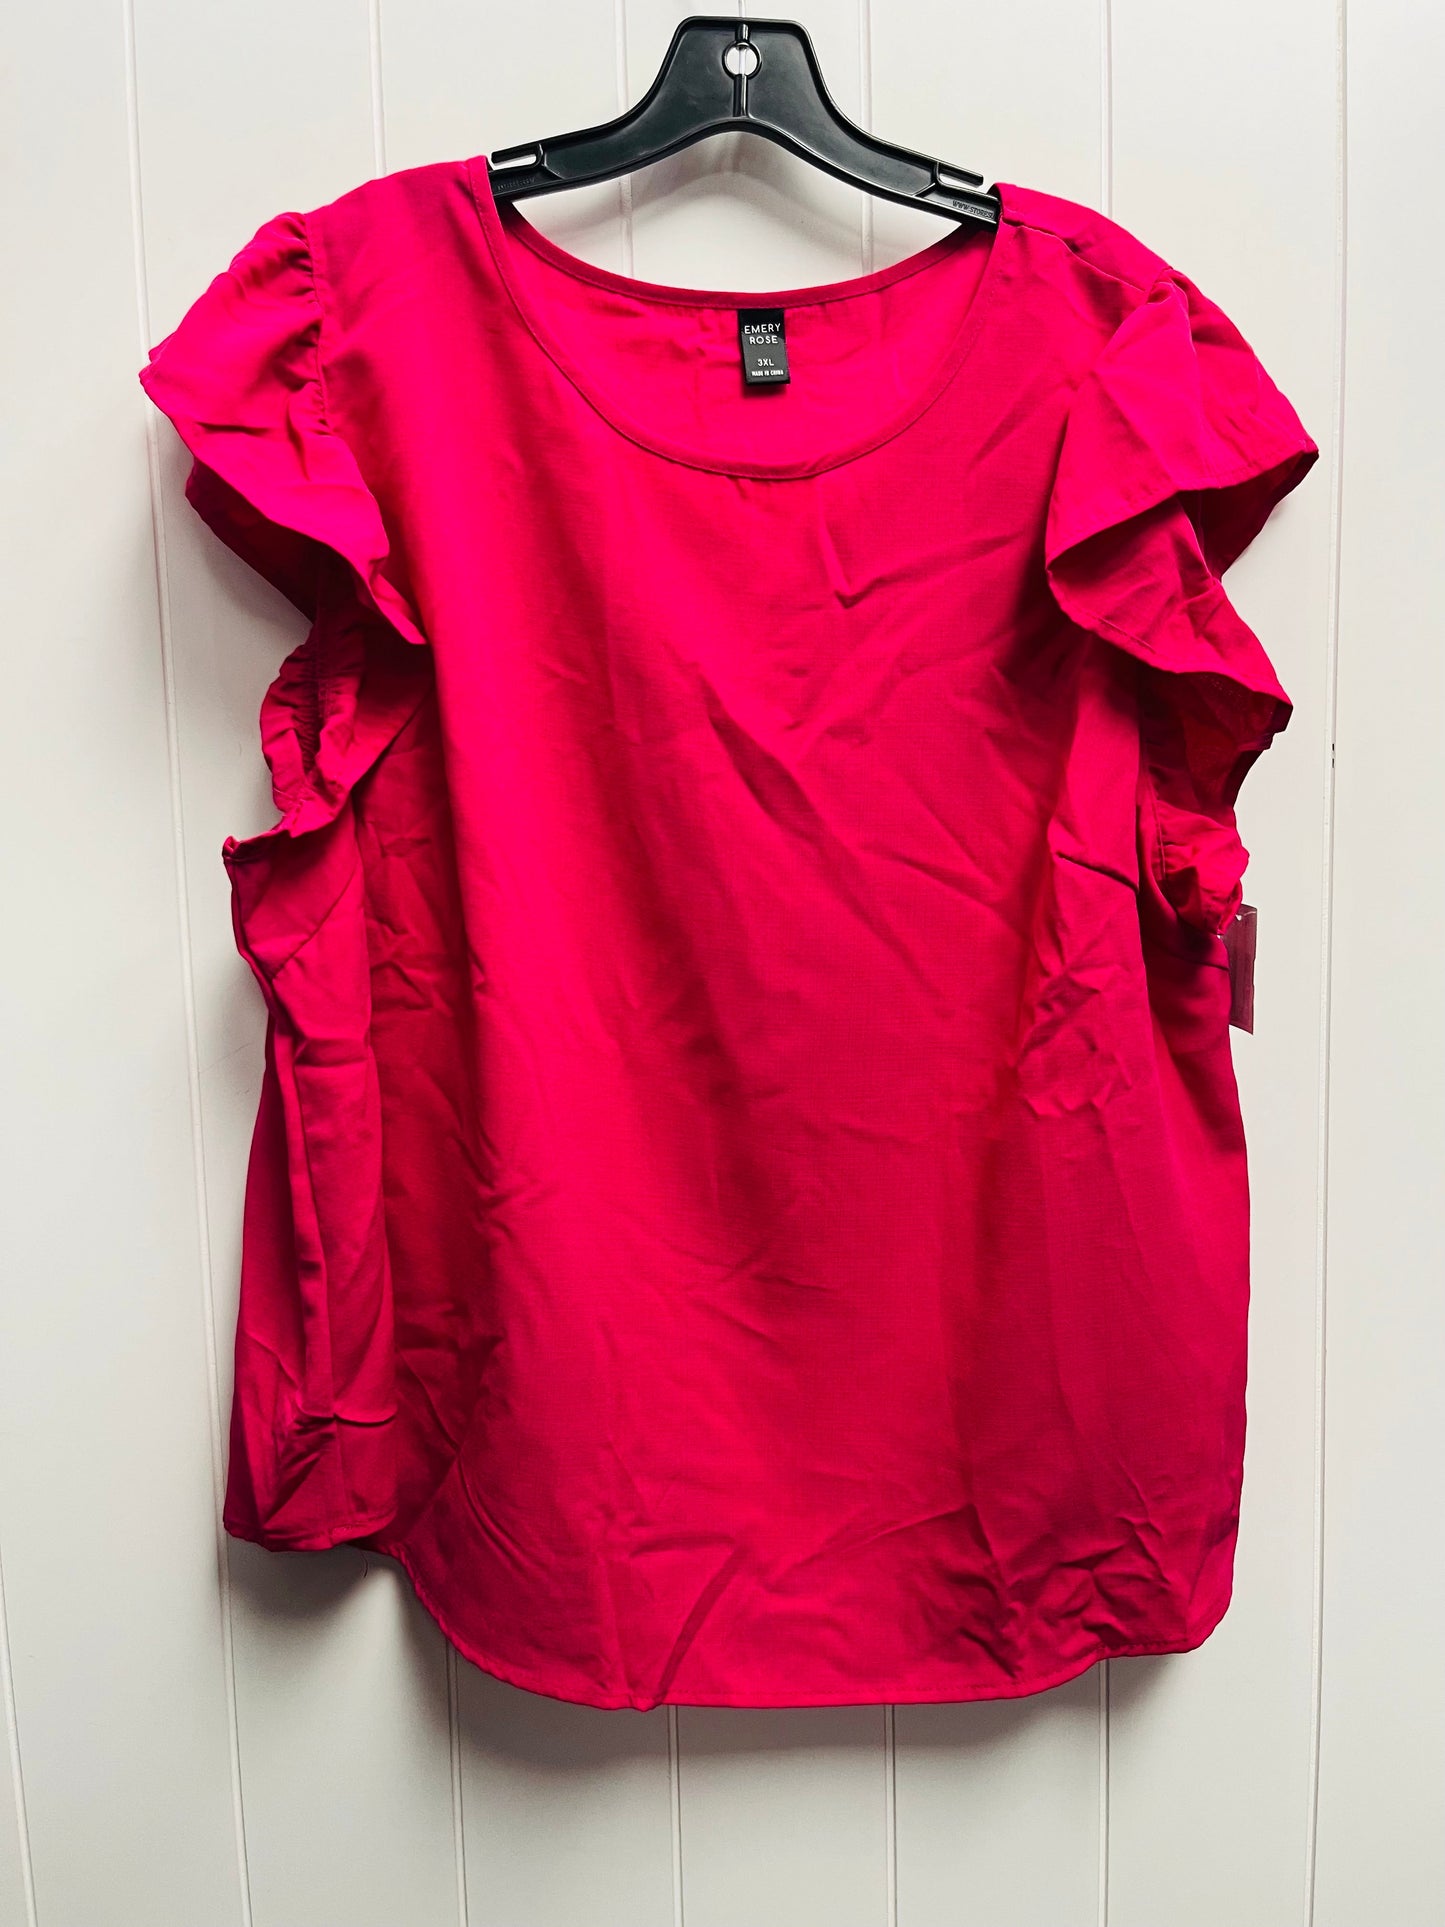 Pink Top Short Sleeve Emery Rose, Size 3x